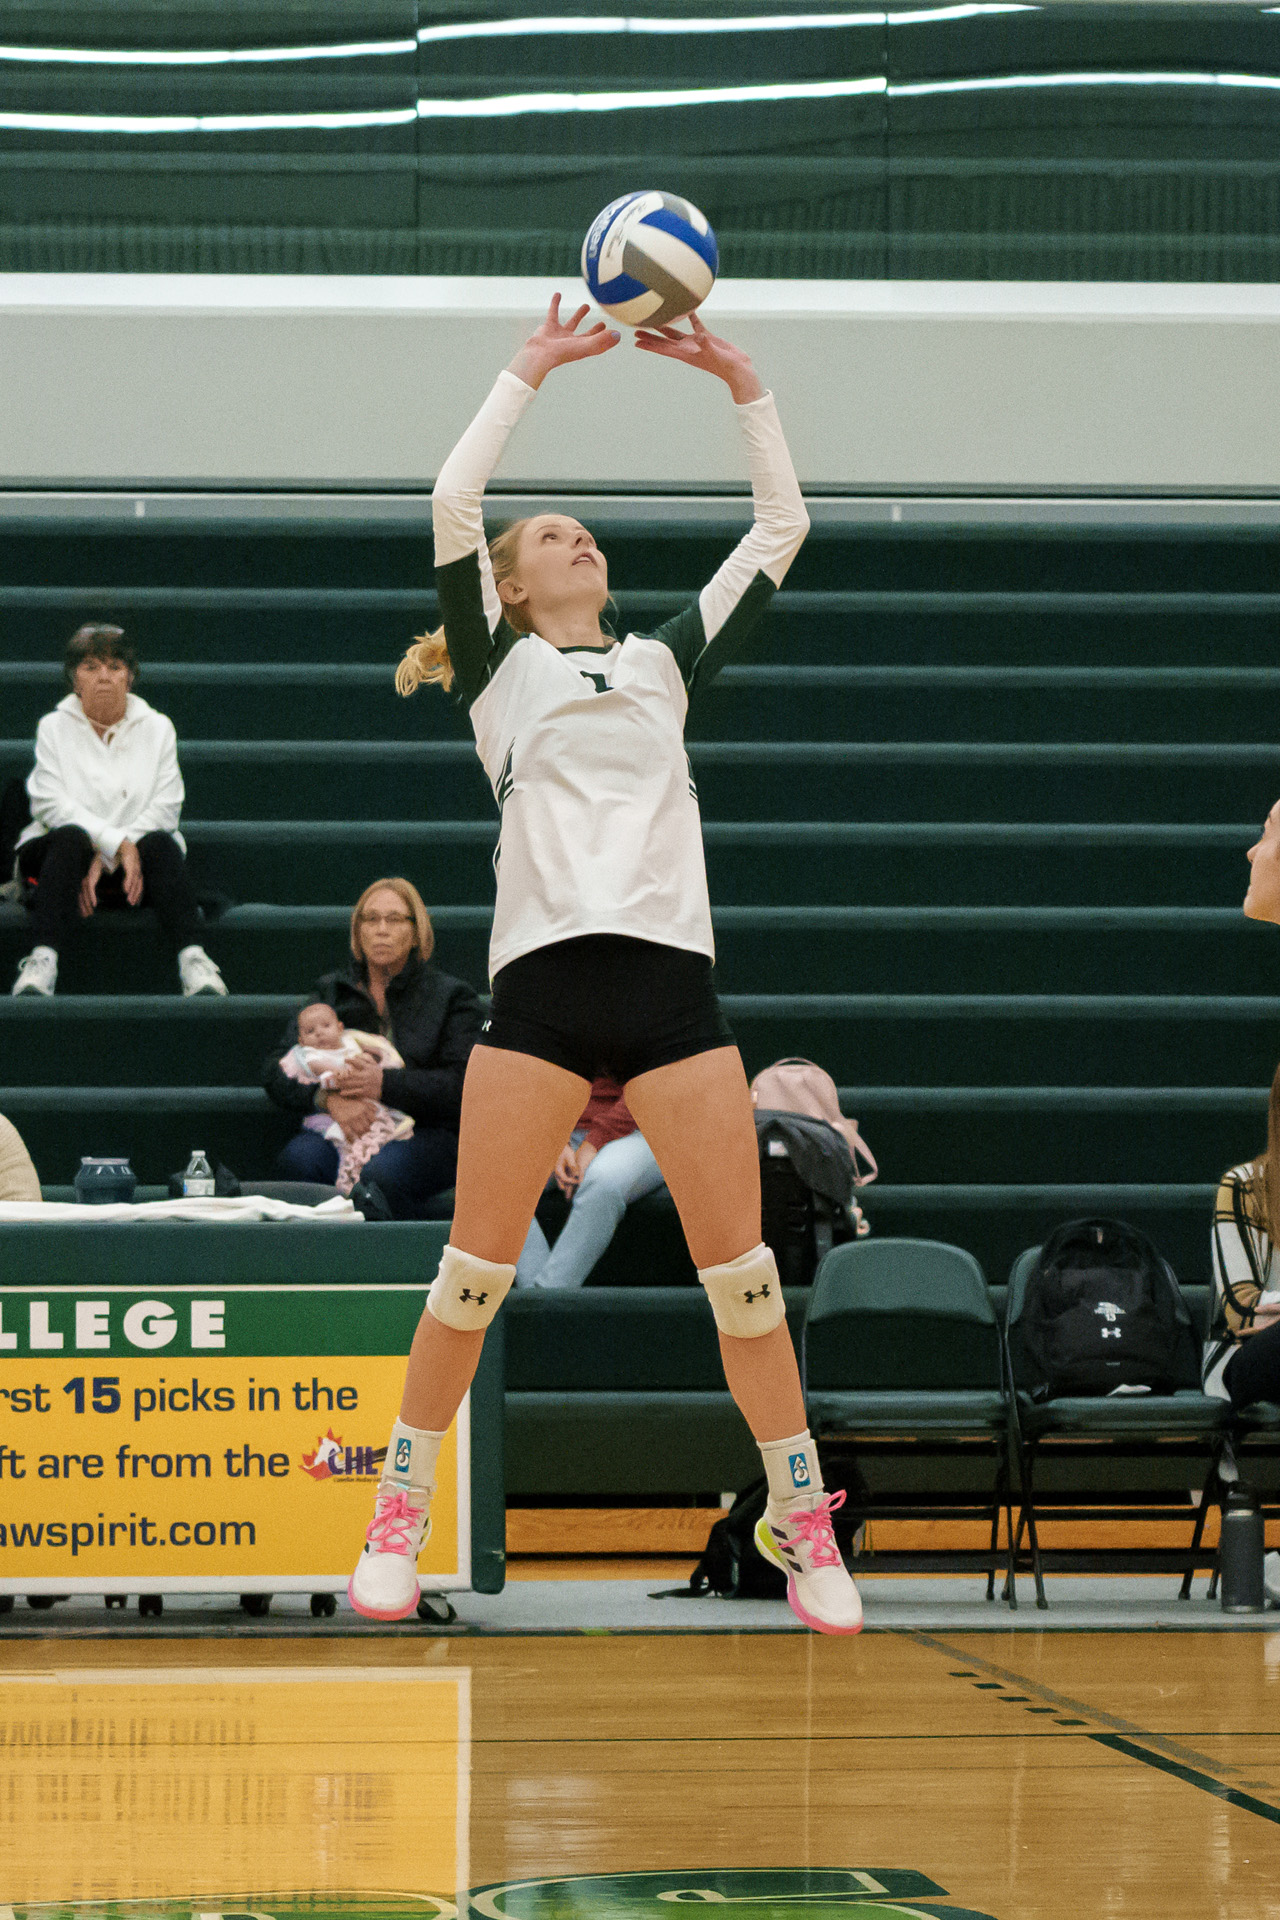 Delta College Volleyball player jumps high for ball